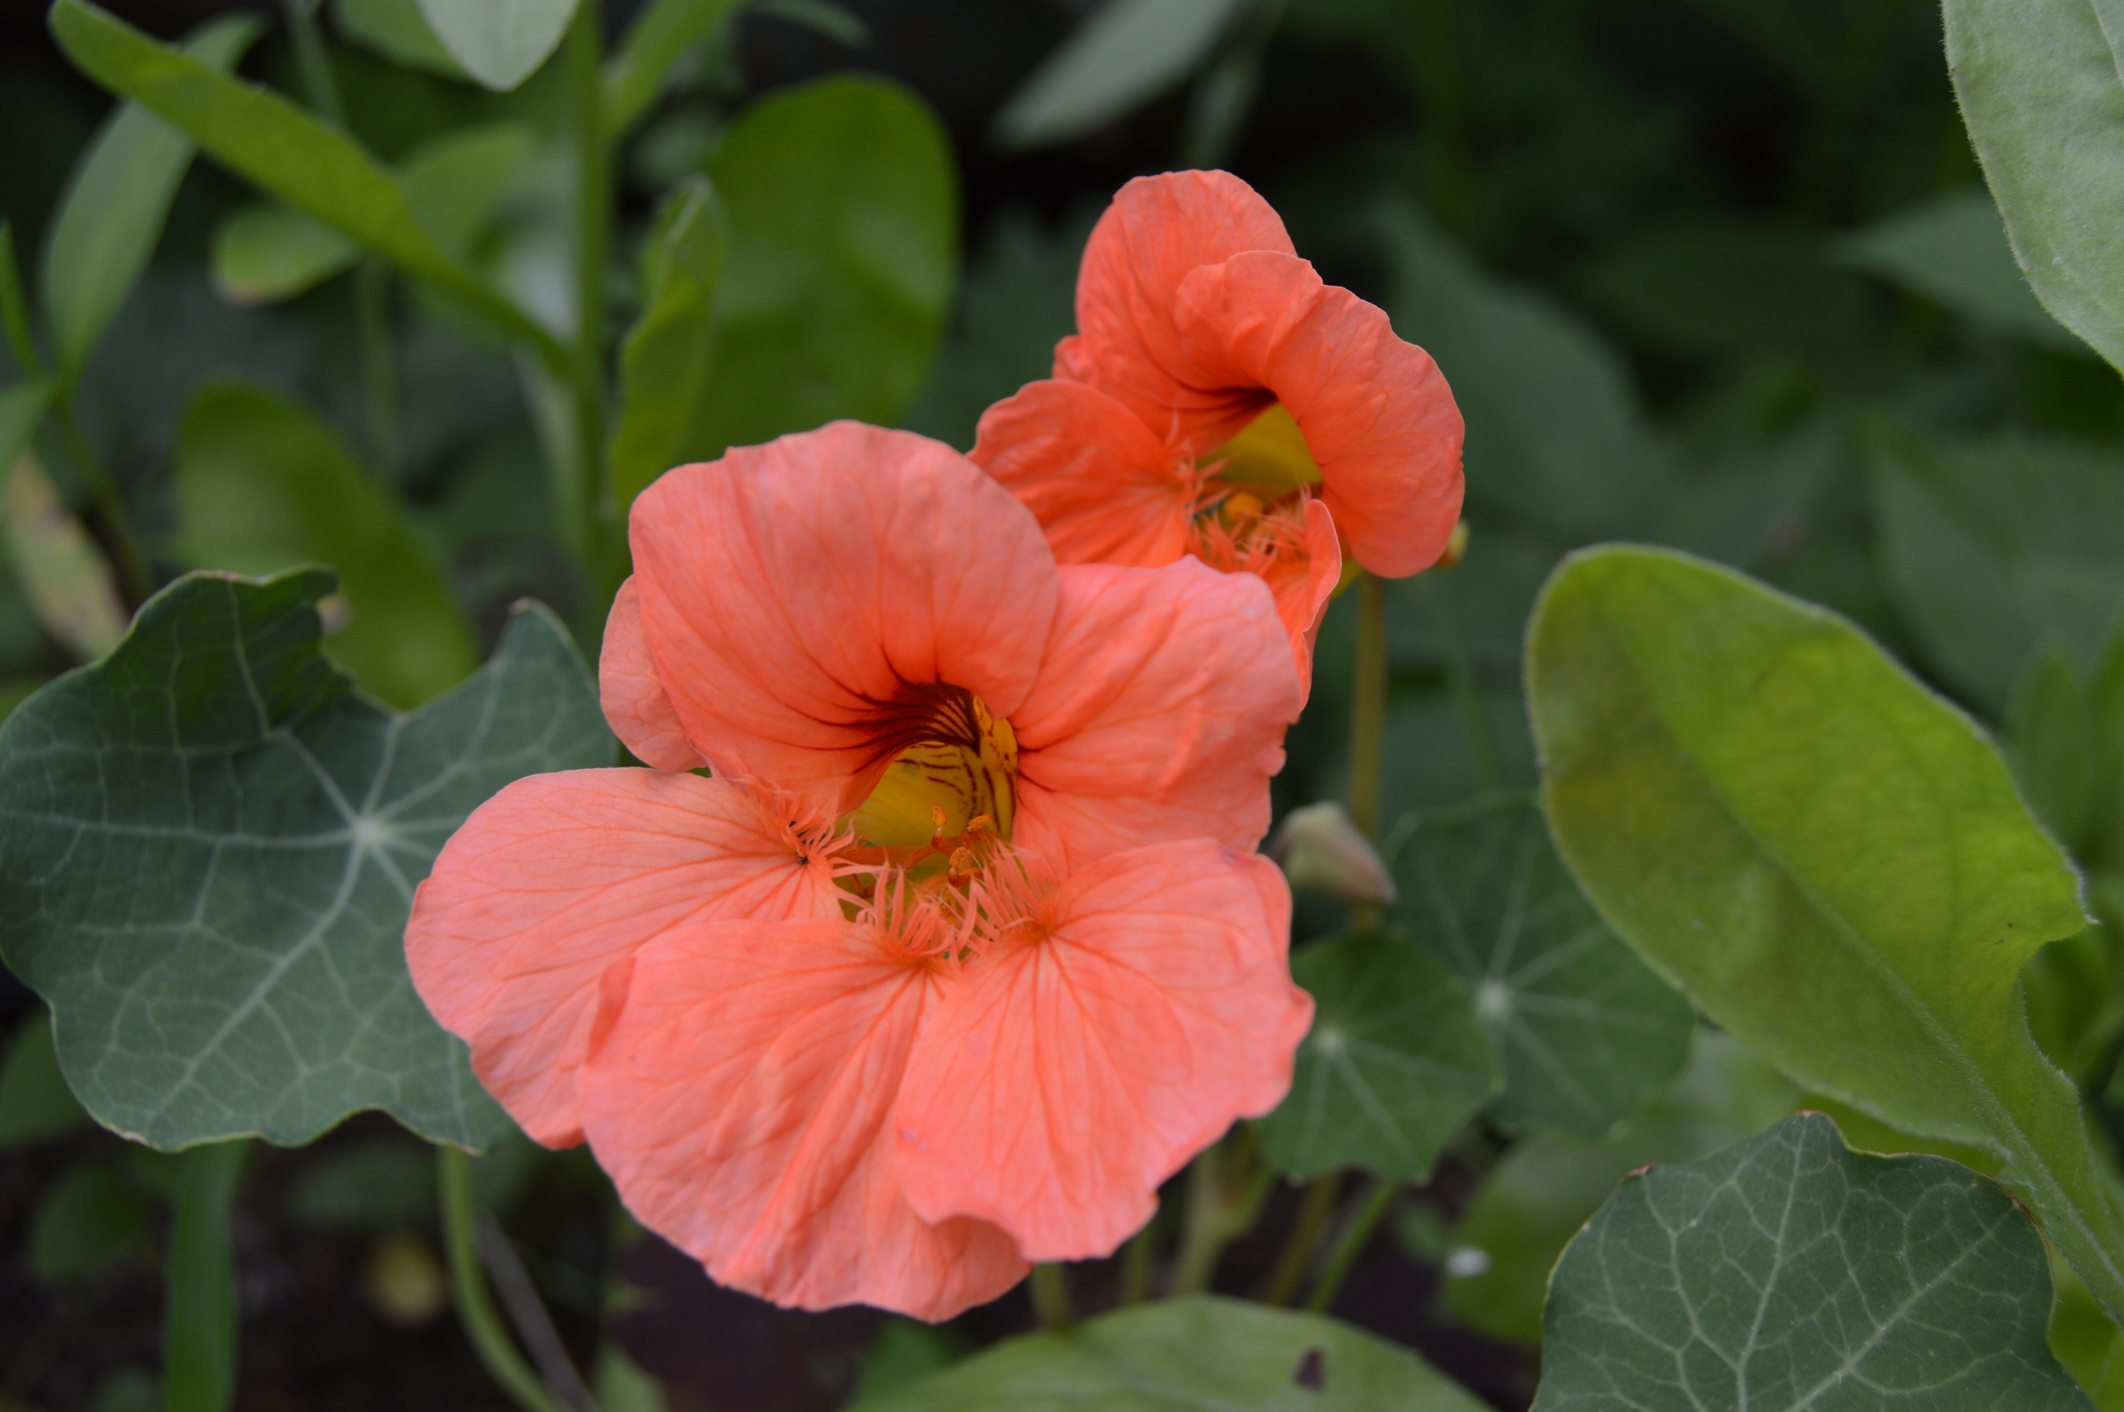 A bright orange Petunia flower blooms among green leaves.